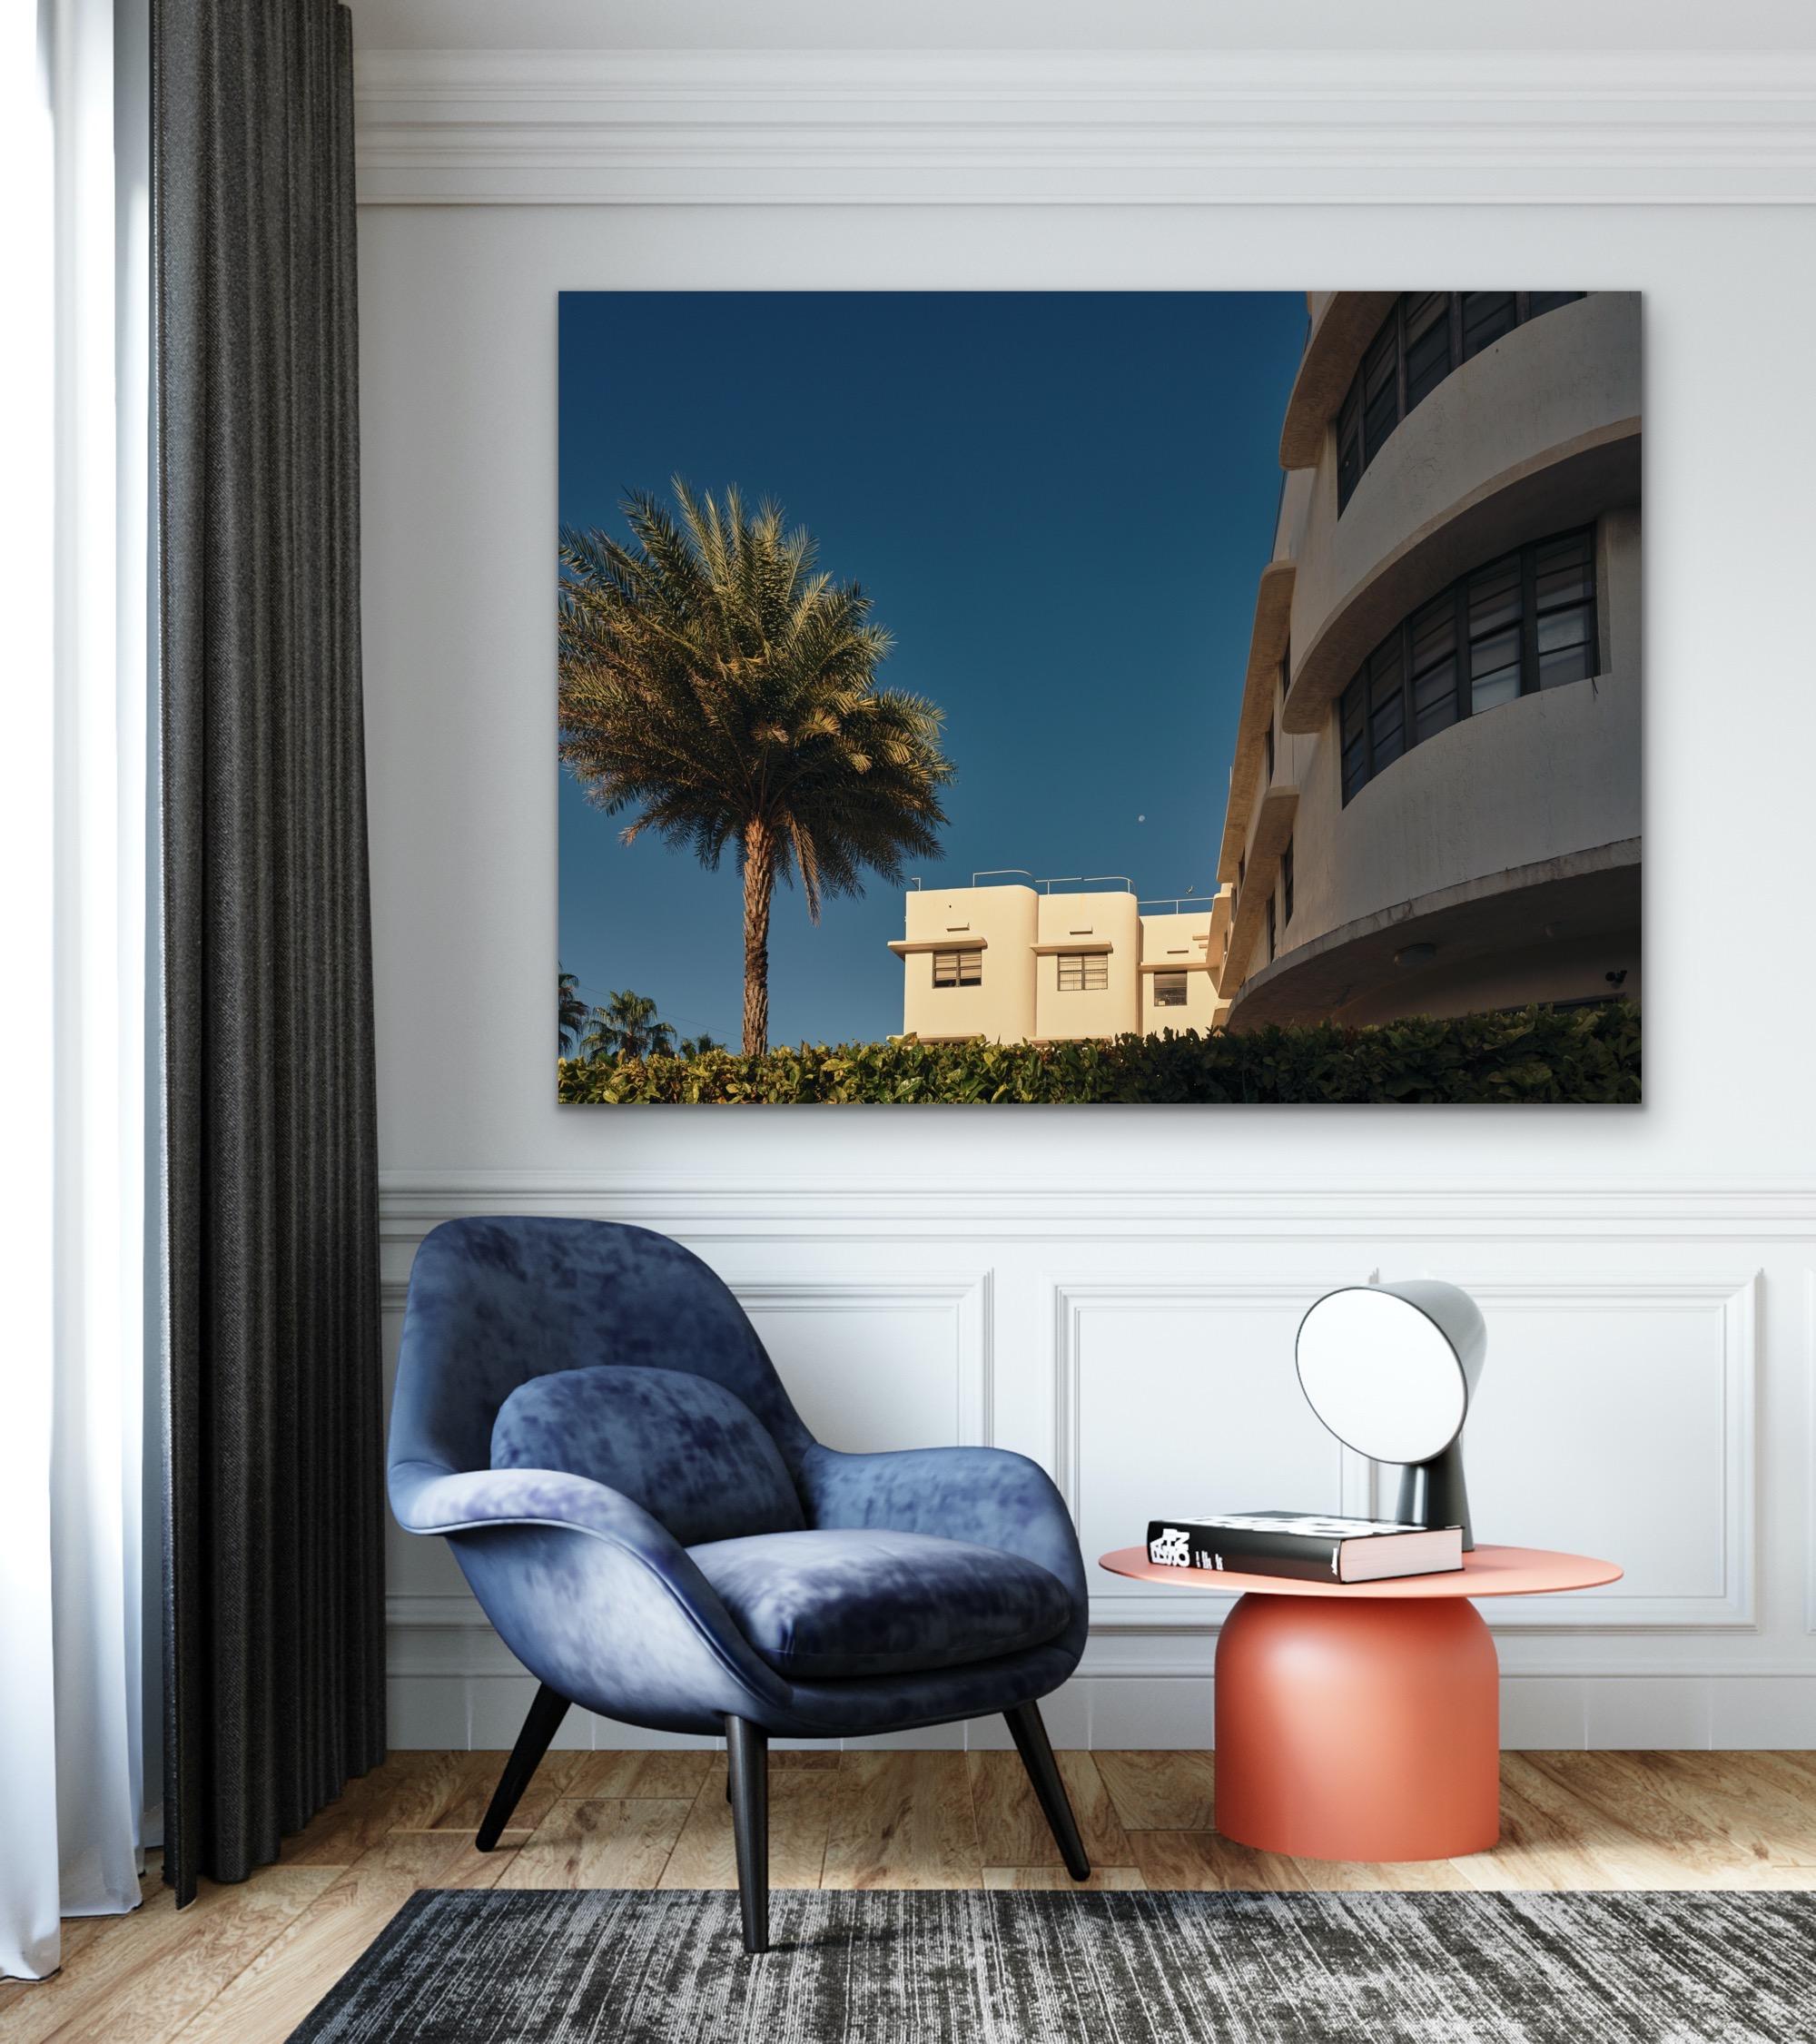 This contemporary coastal photograph by Peter Mendelson captures shadowed buildings next to a palm tree at sunset in Miami Beach, Florida. In the clear blue sky above the white, coastal structures, a small moon is visible. 

This is a metal